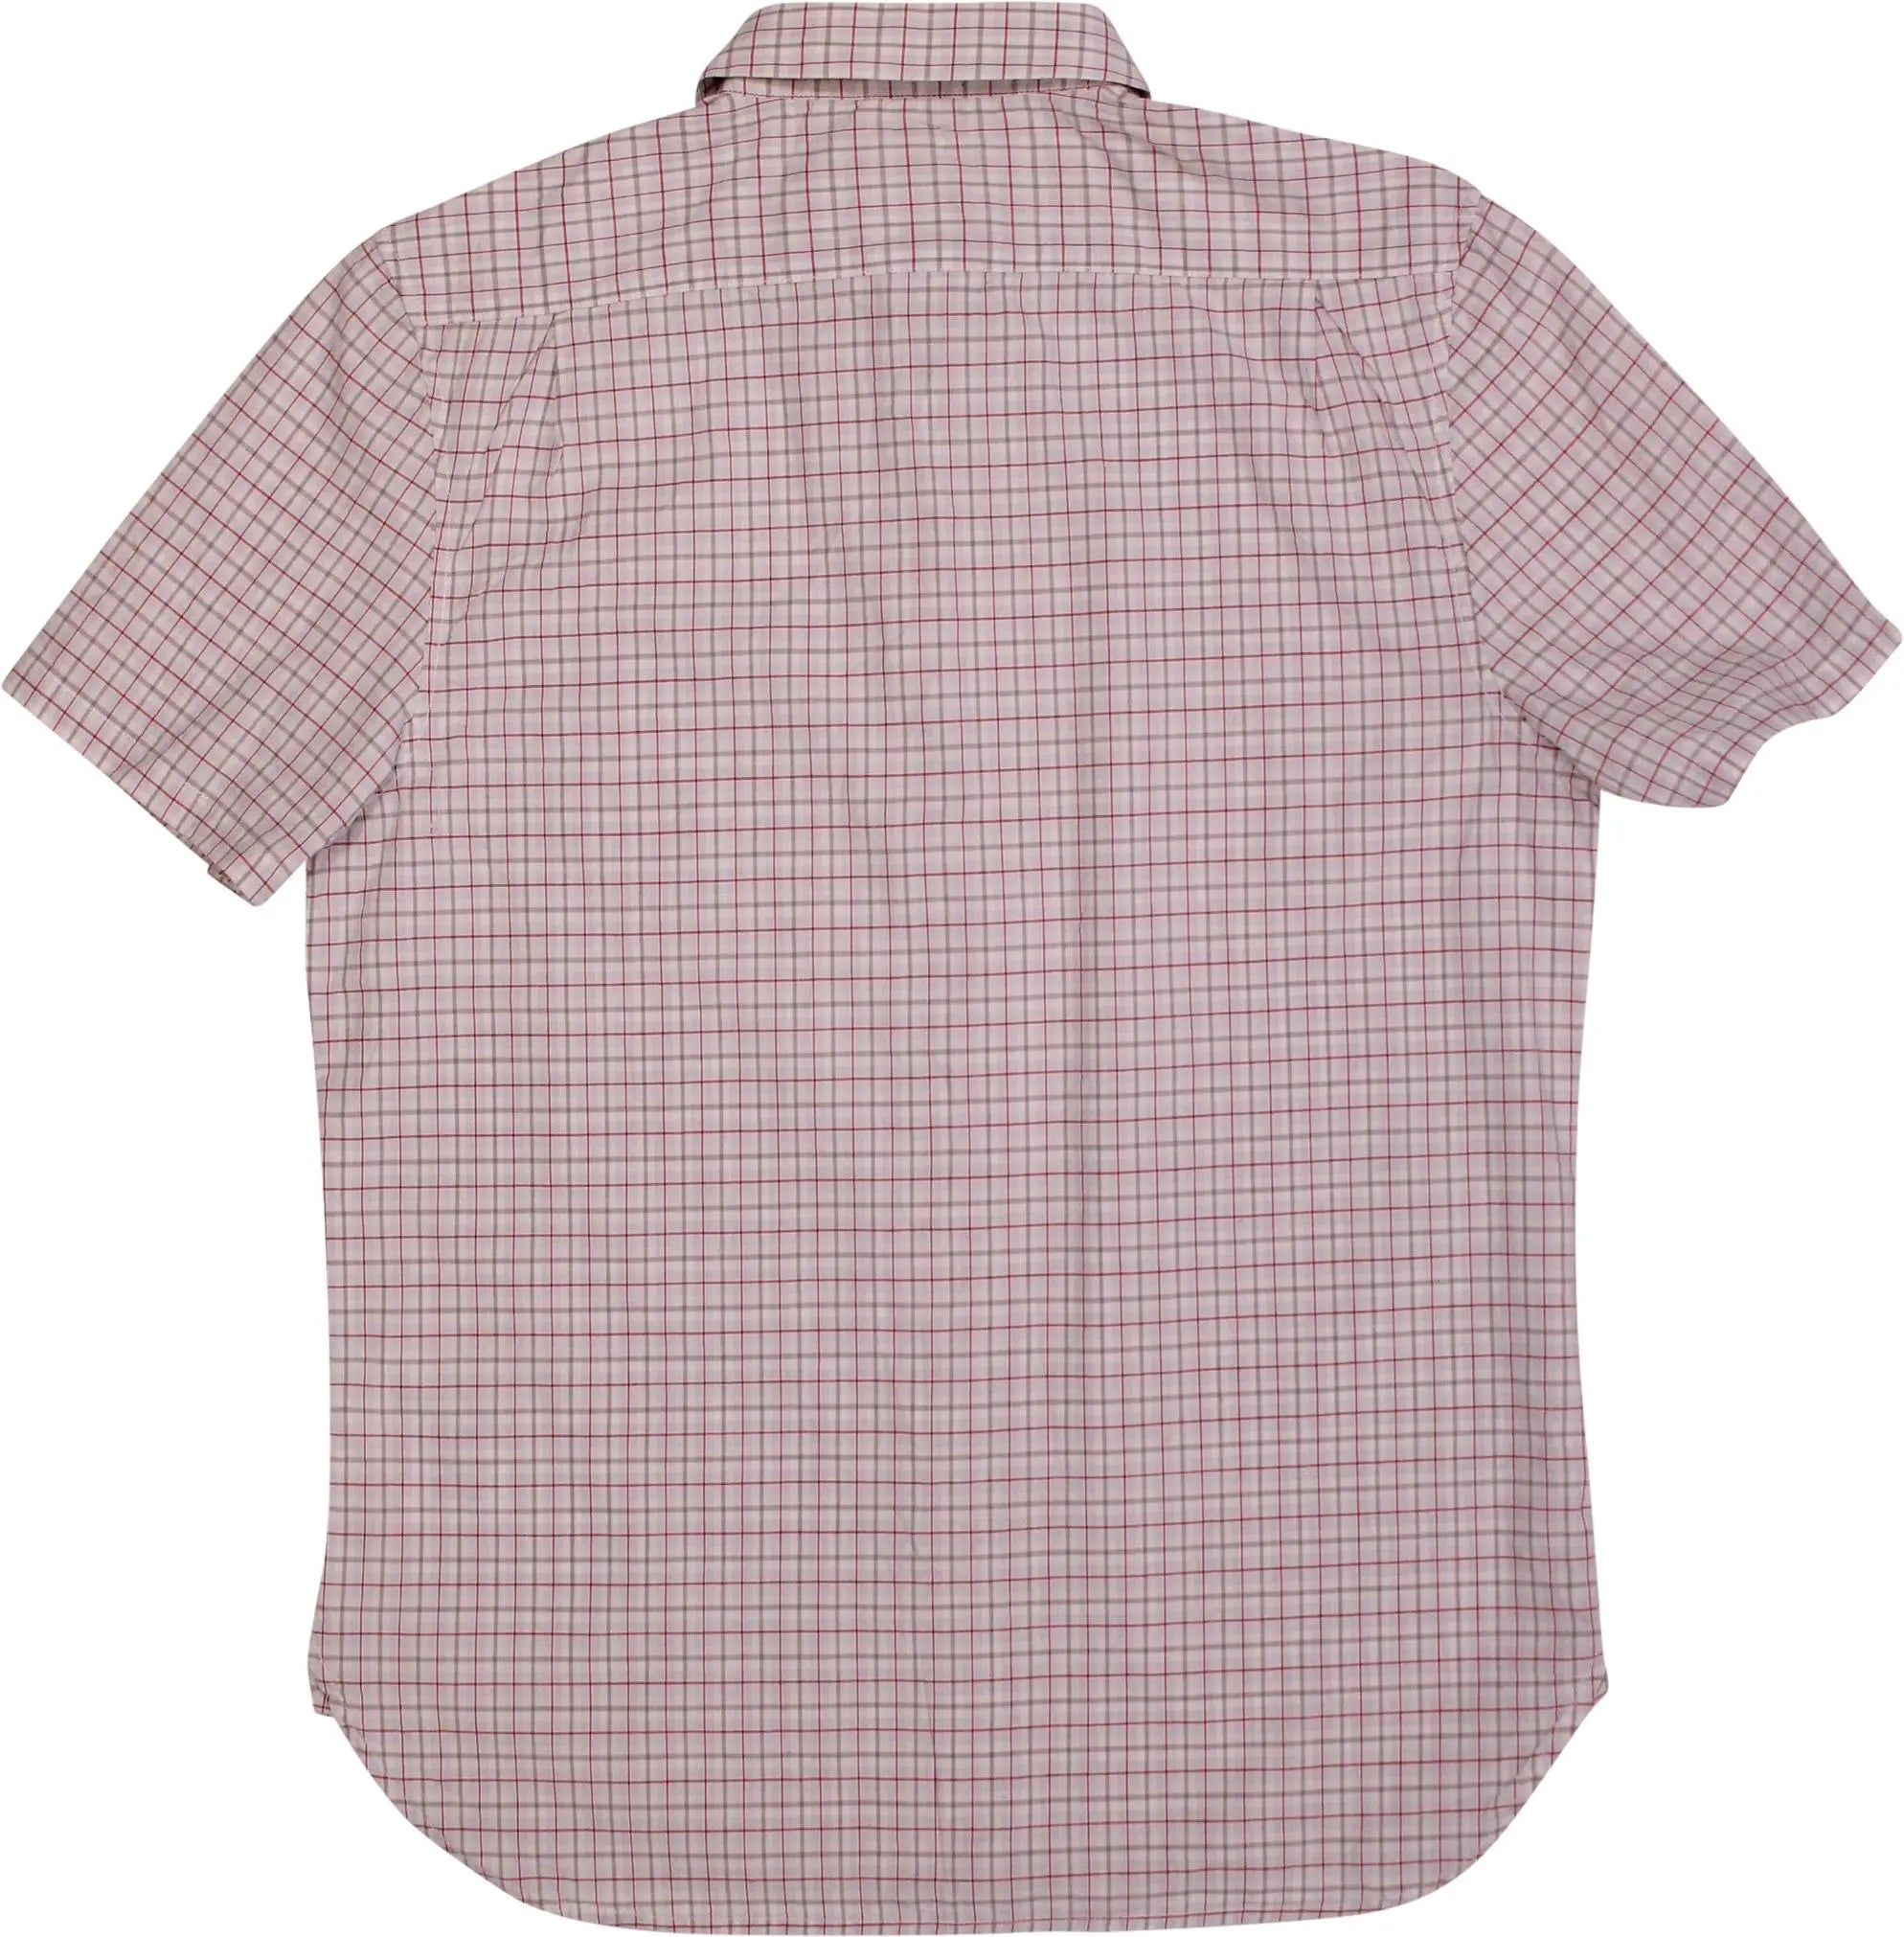 Levi's - Checked Short Sleeve Shirt by Levi's- ThriftTale.com - Vintage and second handclothing